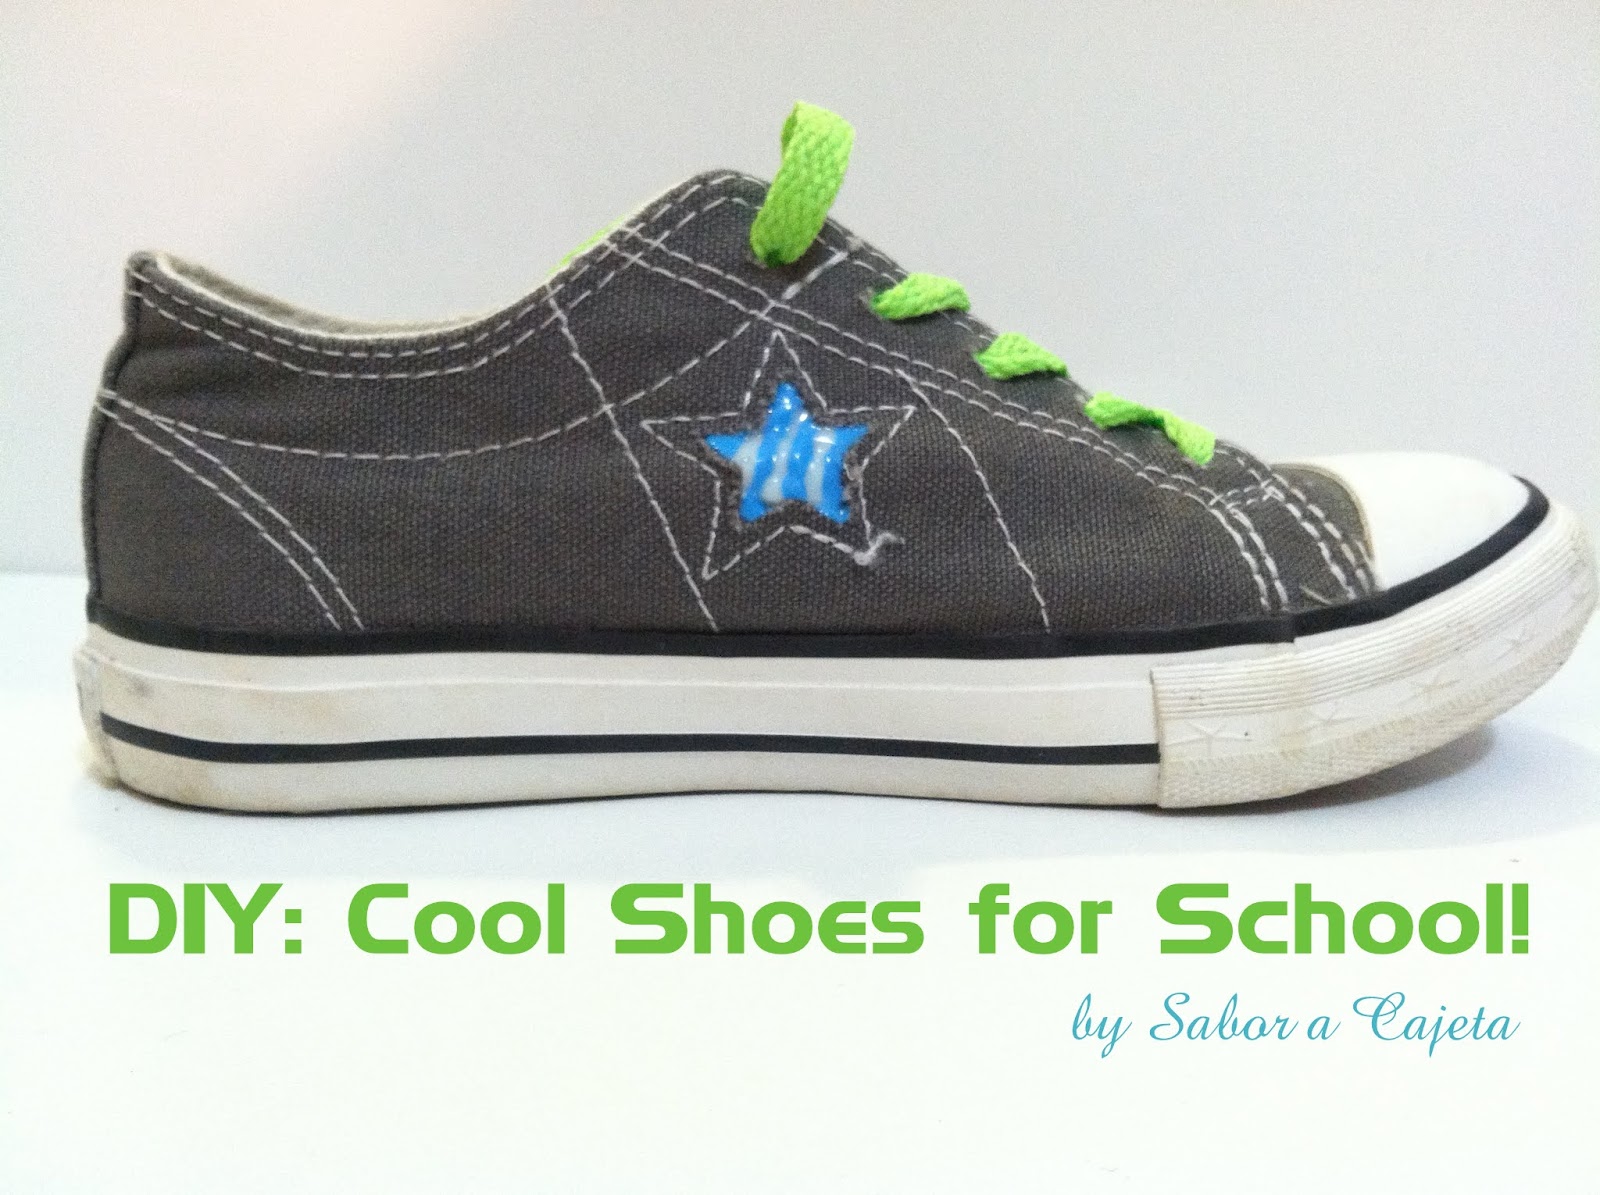 Cool Shoes for School: (DIY) Spruce Up Your Plain Converse